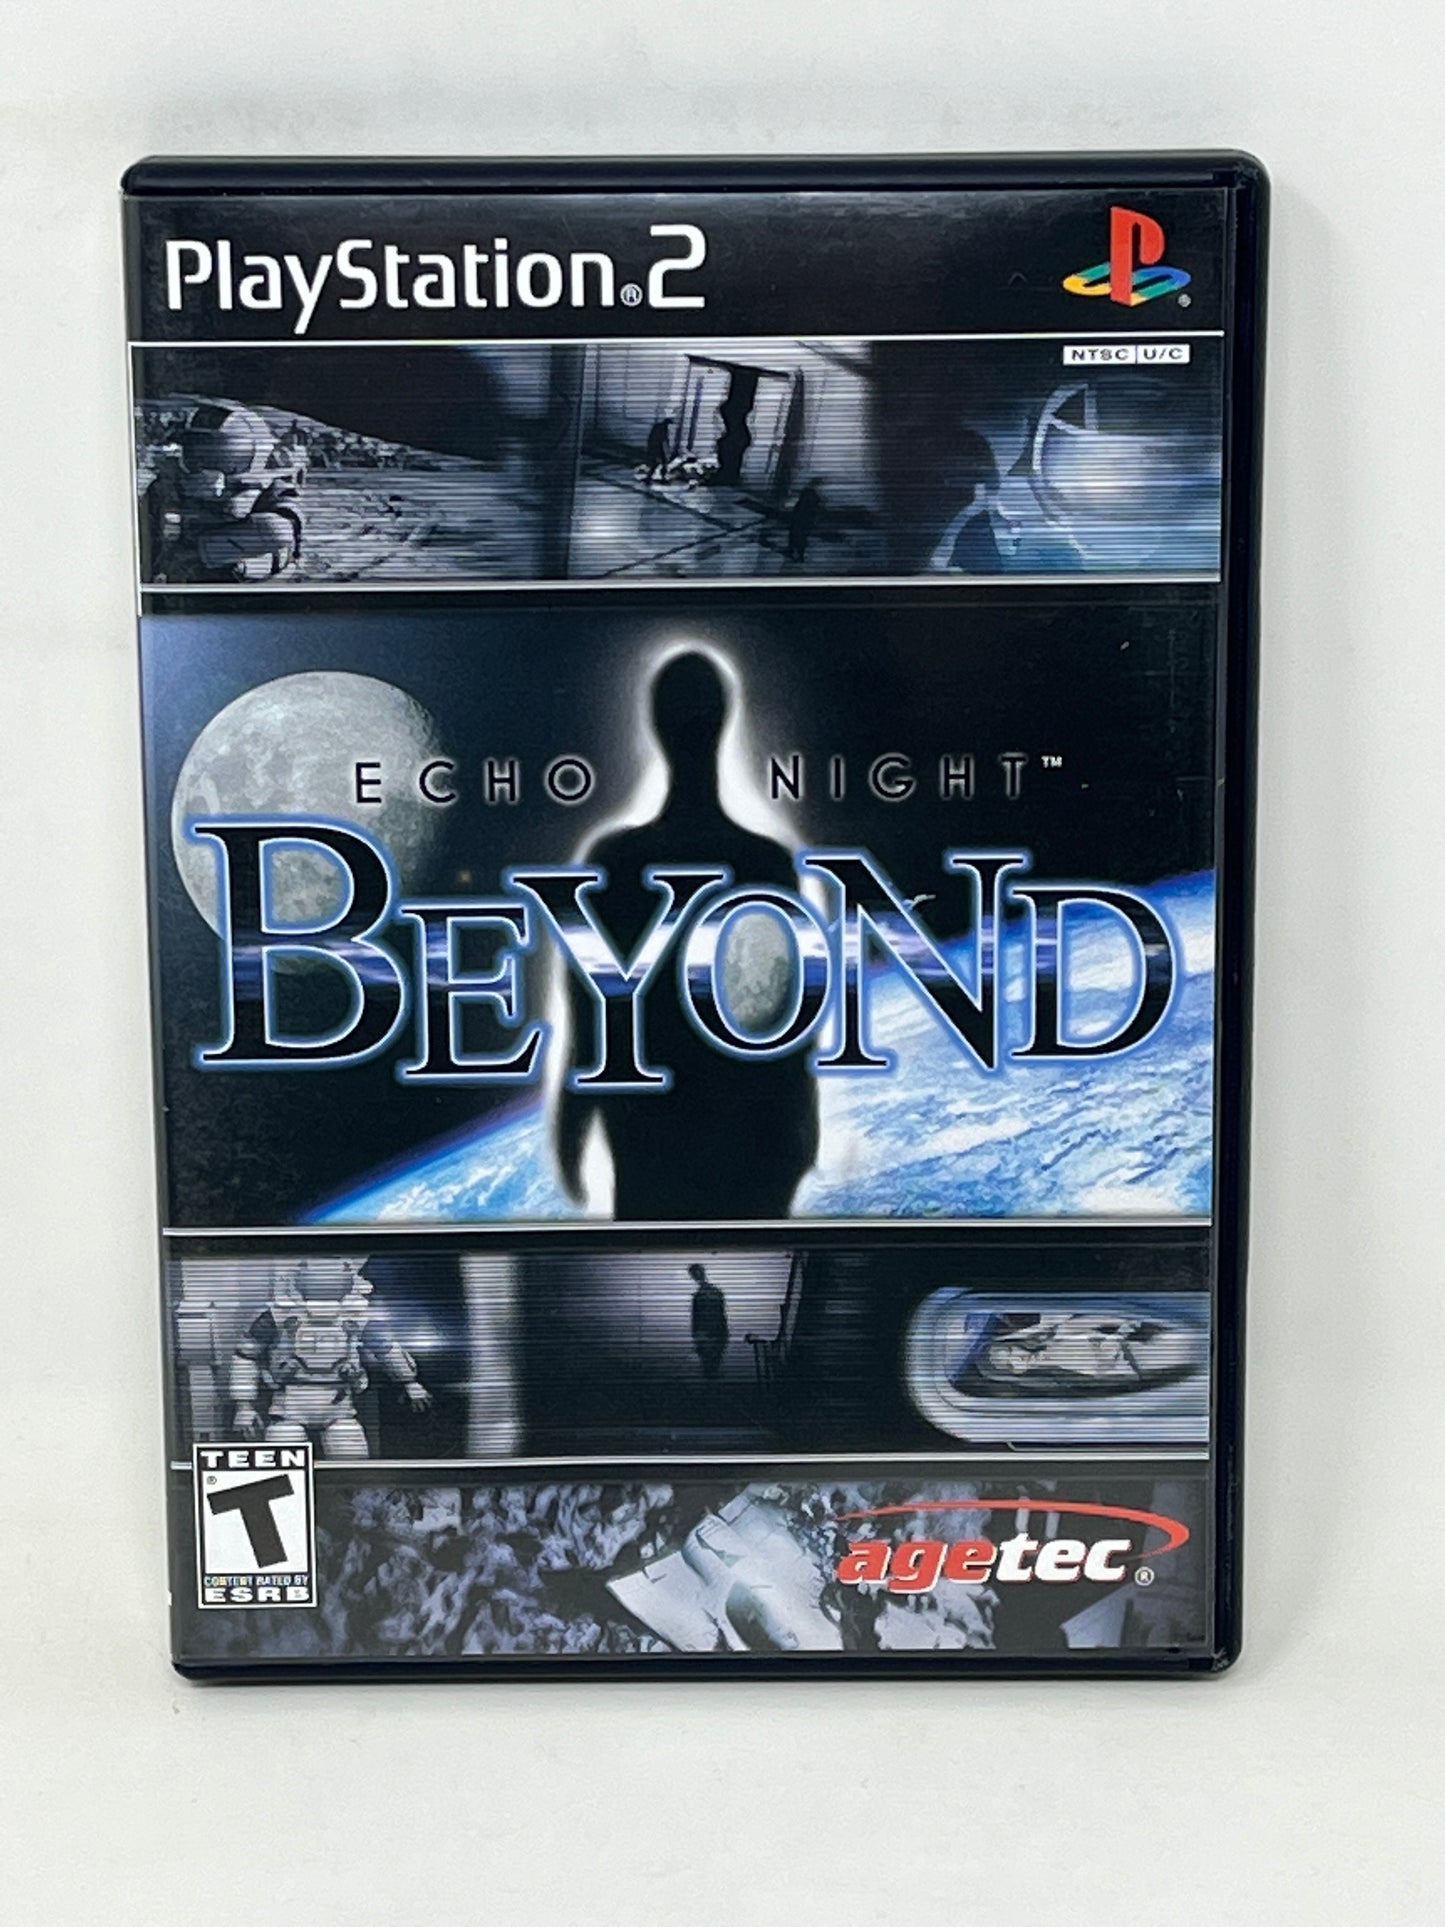 Sony PlayStation 2 PS2 - Echo Night Beyond - Complete